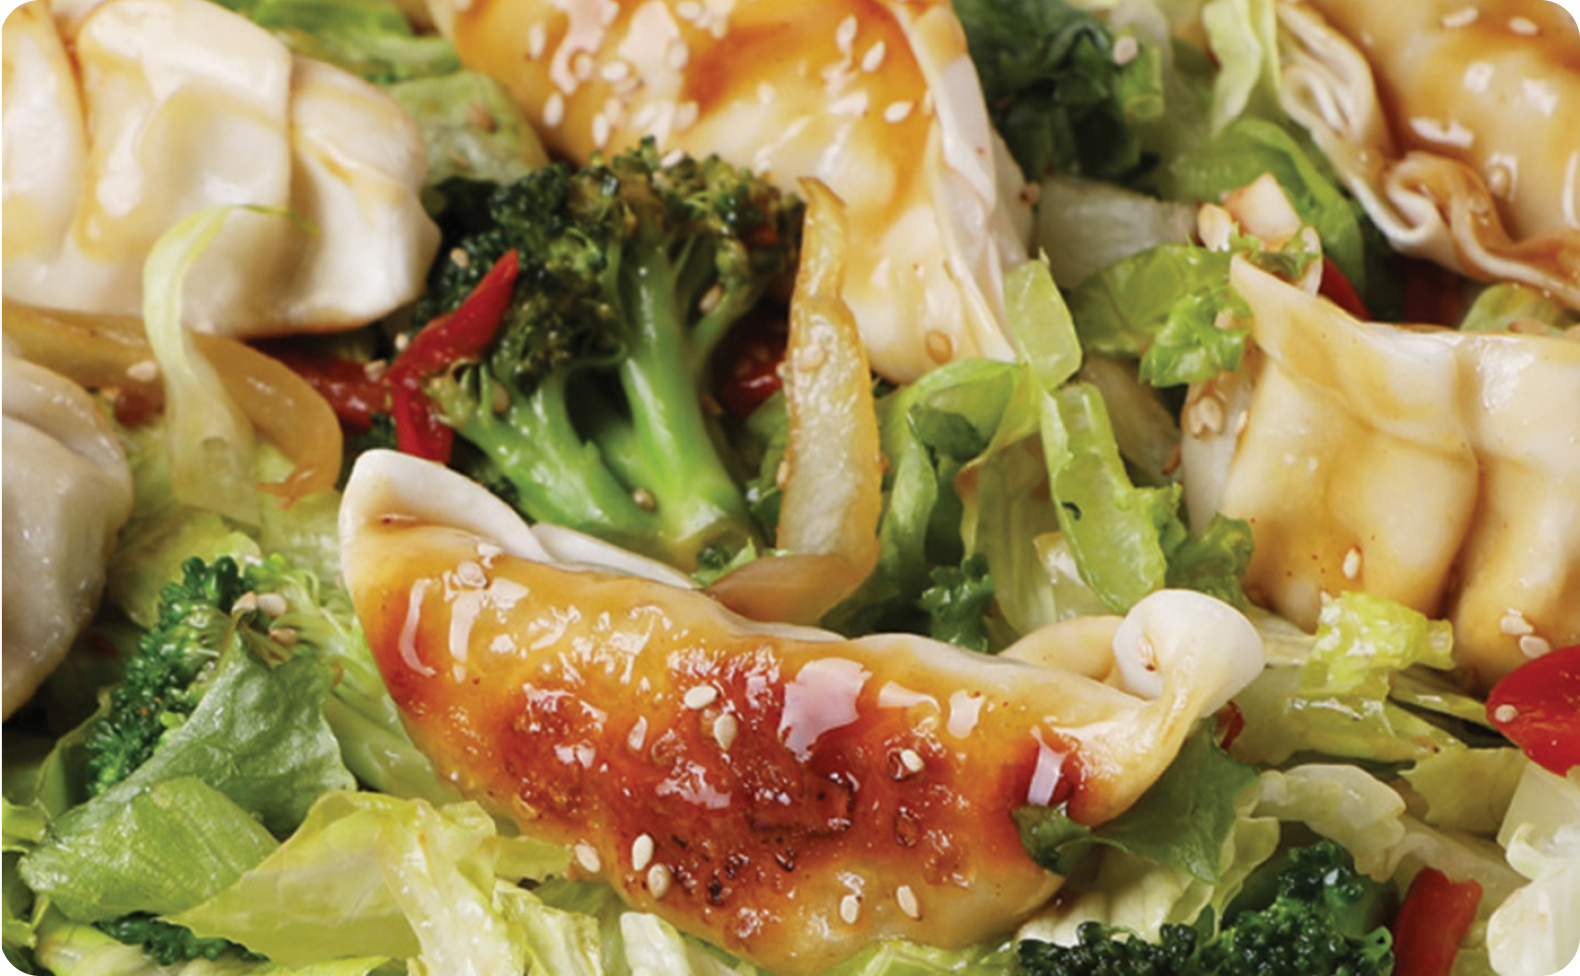 Salad containing a combination of dumplings, lettuce, broccoli, bell pepper and onion.